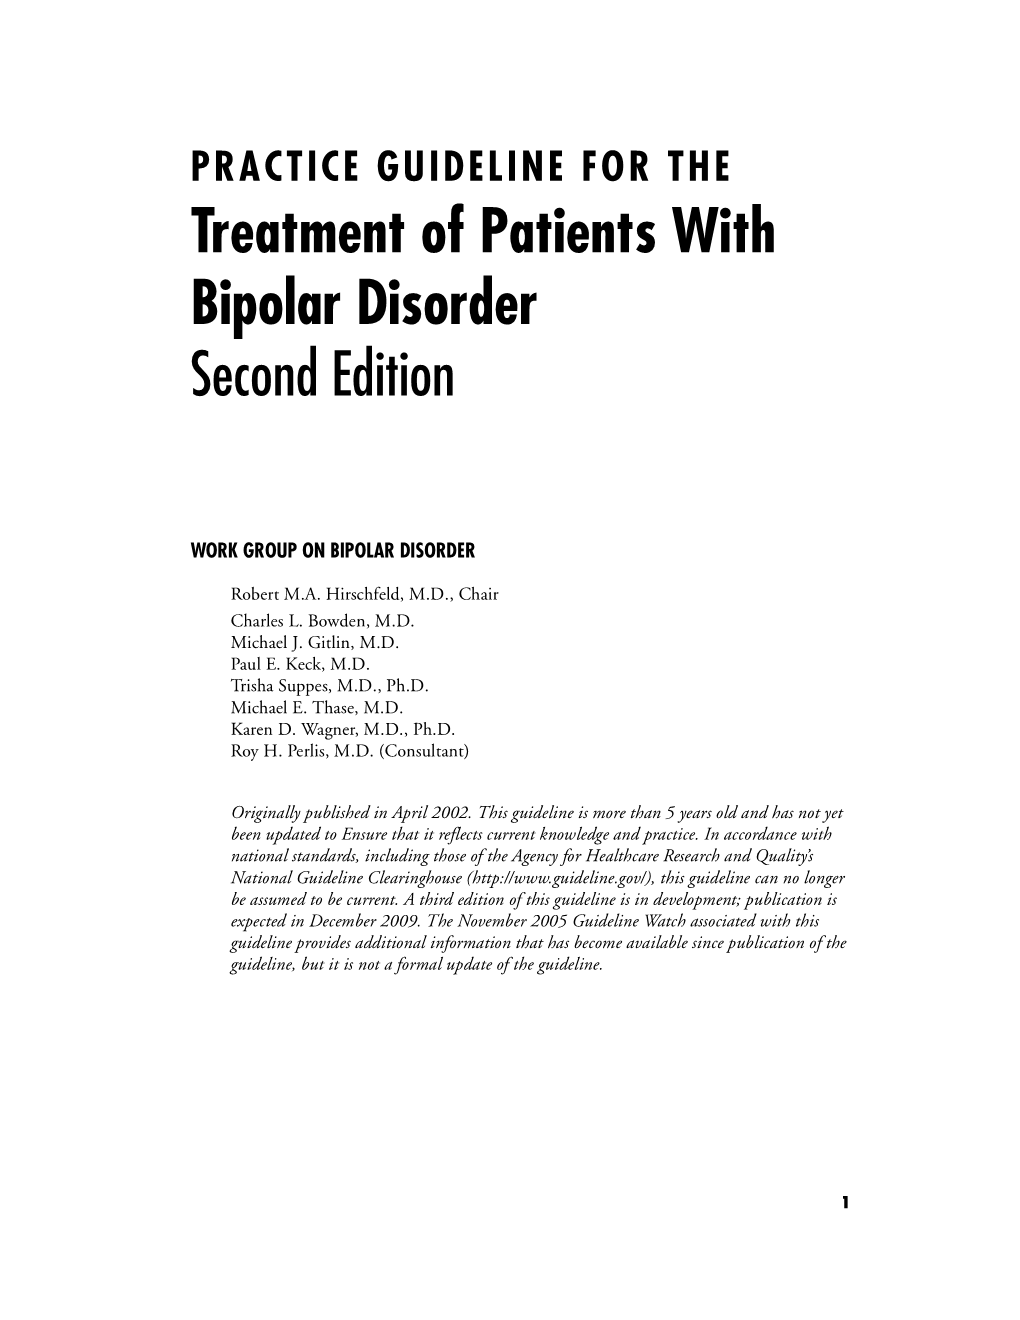 Treatment of Patients with Bipolar Disorder Second Edition